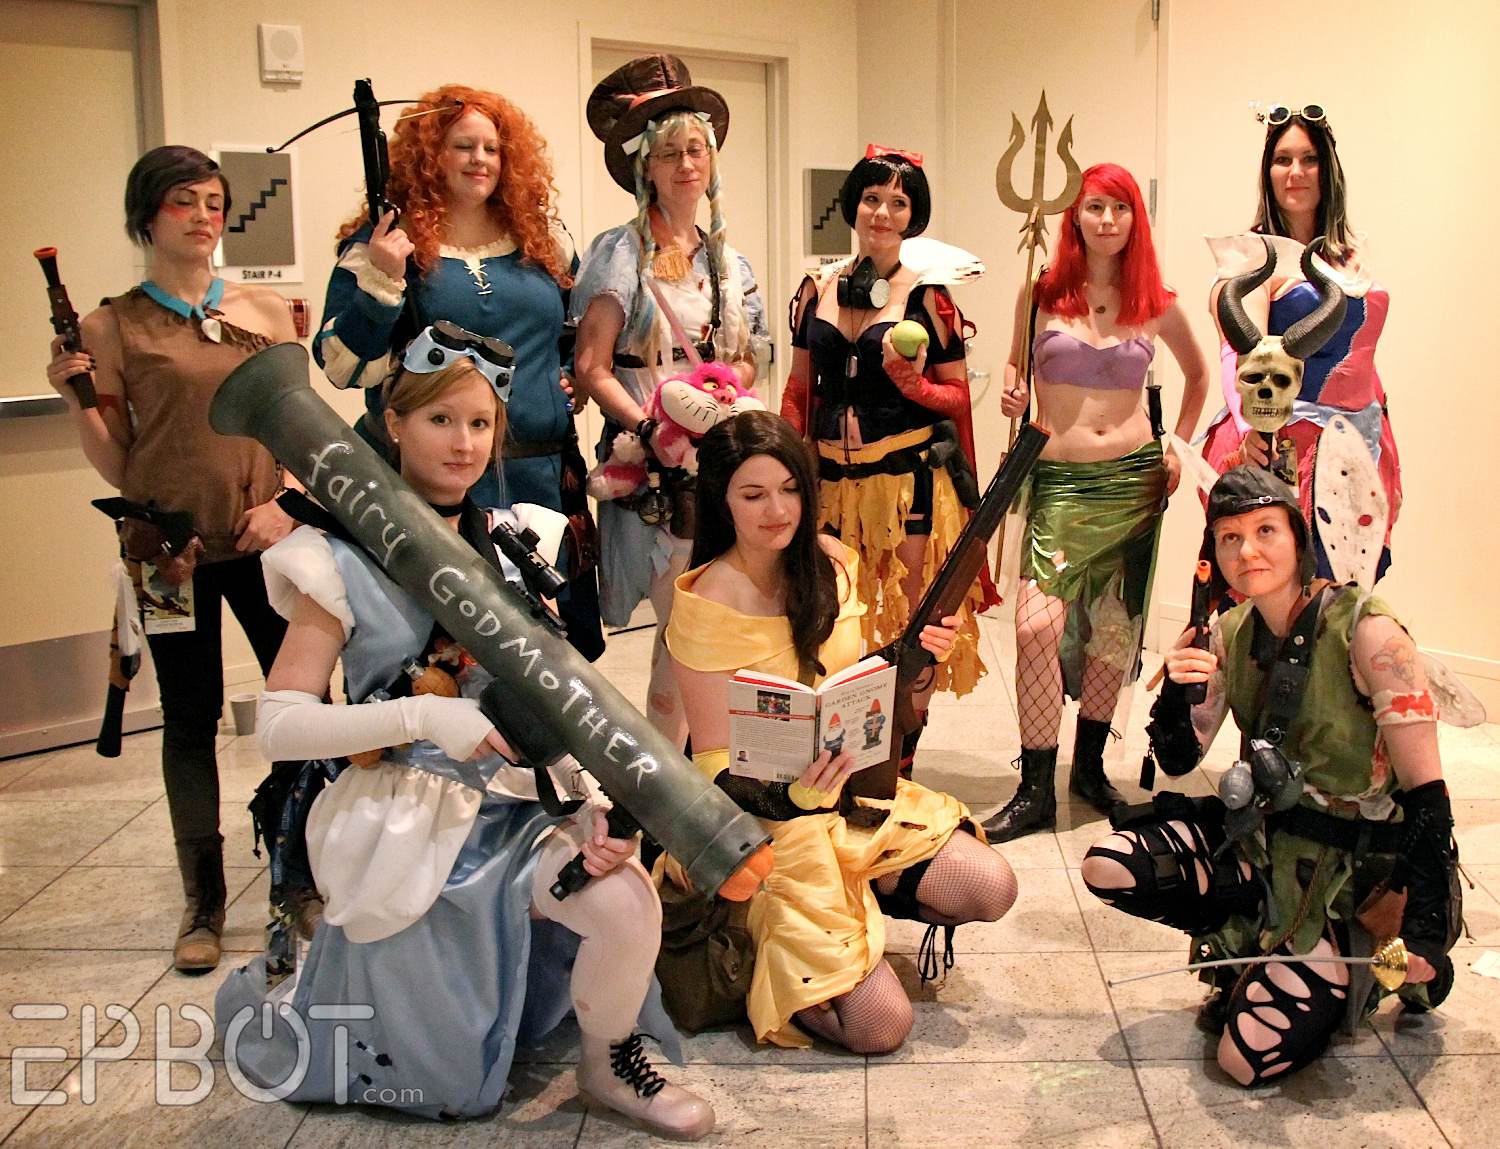 EPBOT: The Best Cosplay of Dragon Con 2014, Pt 3